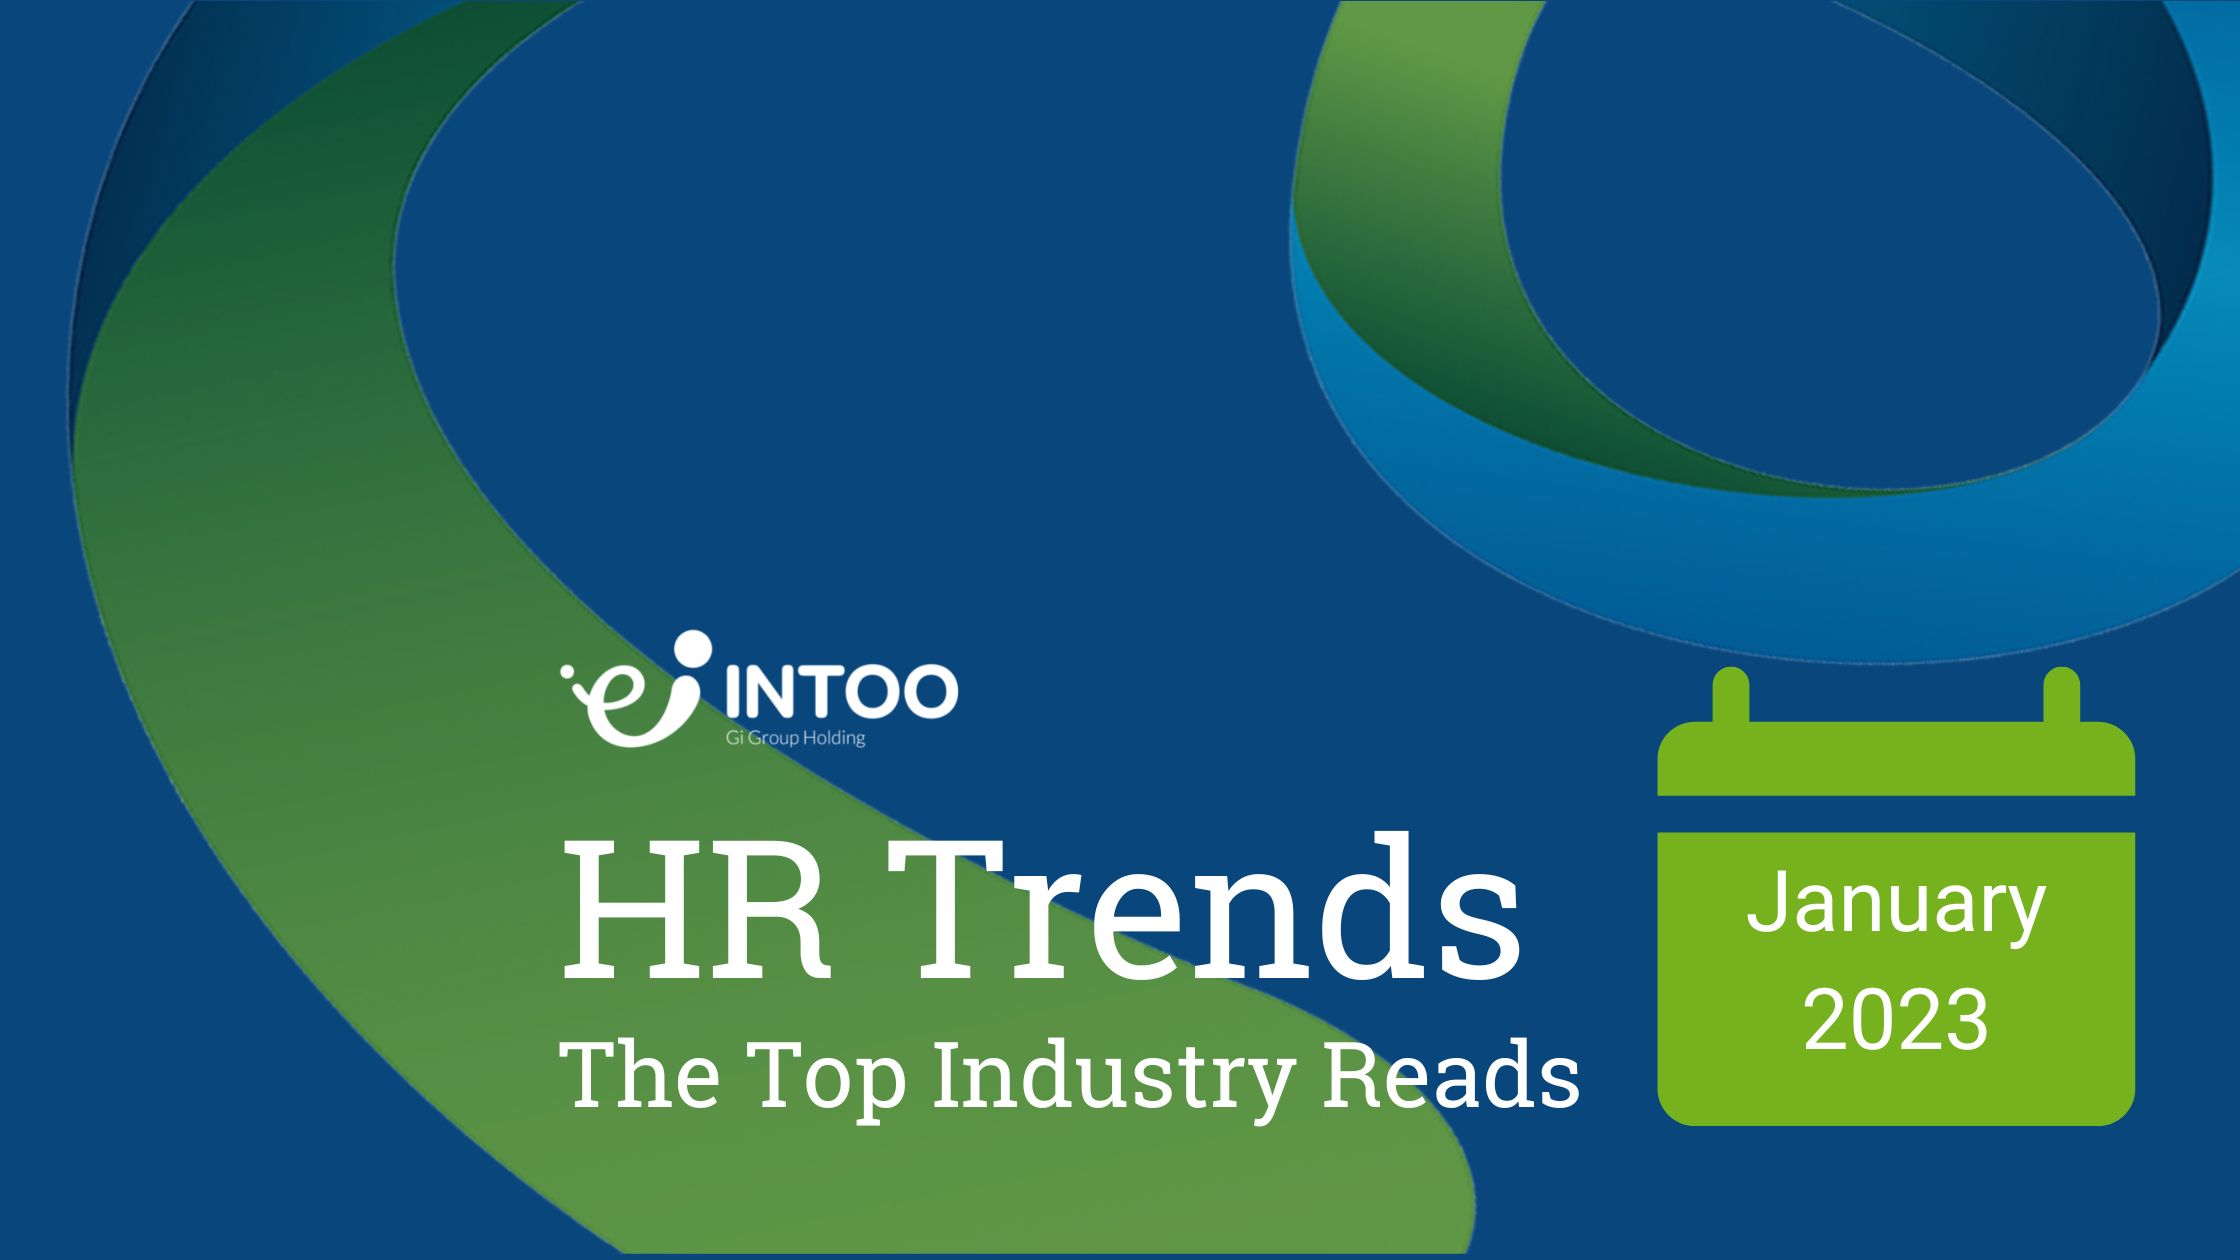 HR Trends of January 2023: The Key Reads